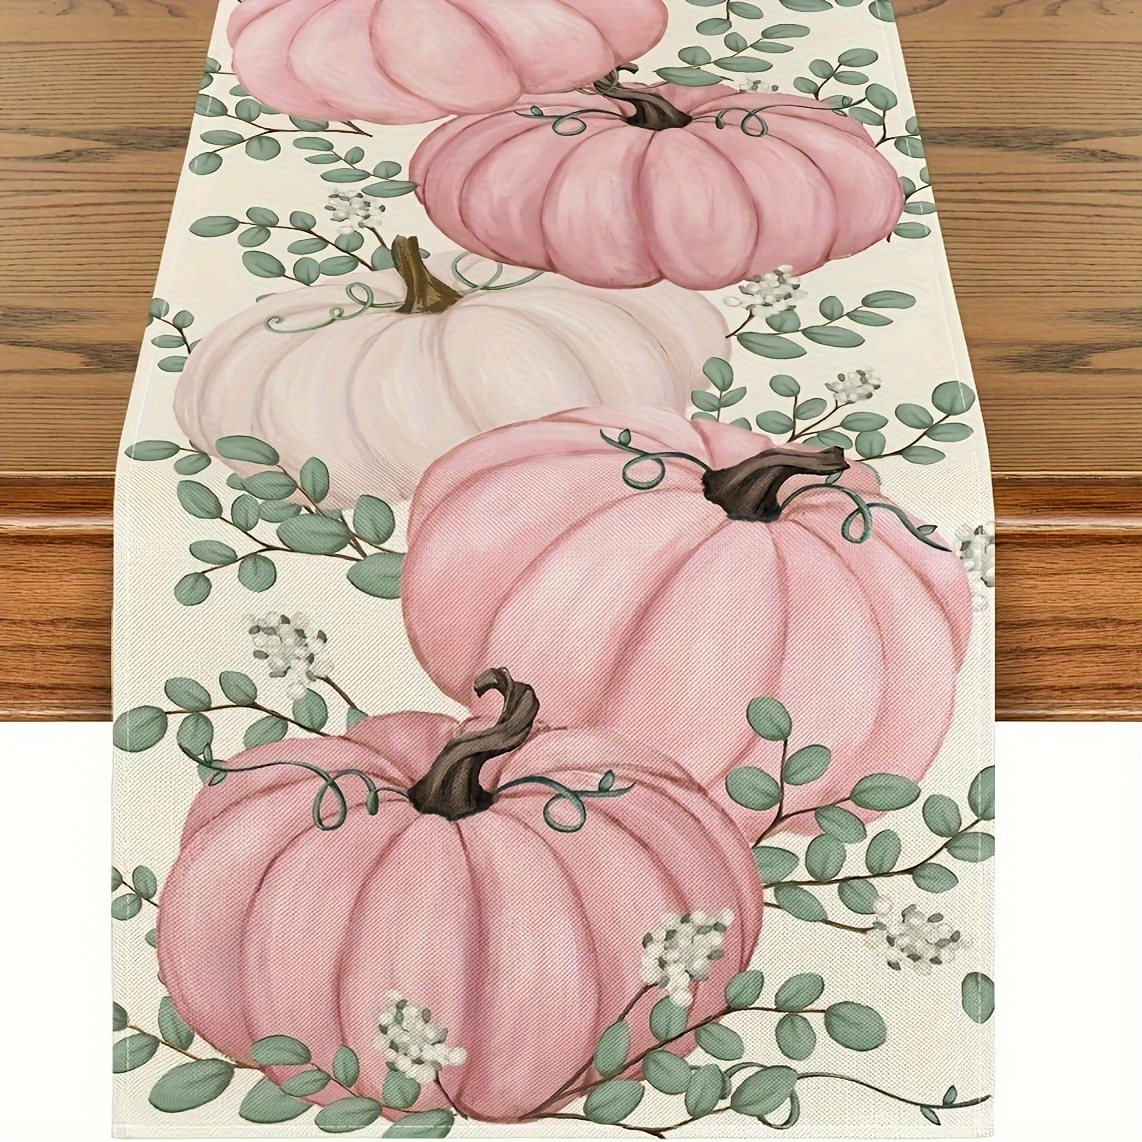 

Pink Pumpkins Eucalyptus Fall Table Runner - Polyester Rectangle Woven Autumn Thanksgiving Kitchen Dining Decoration, 13x72 Inch - Fade Resistant, Machine Washable, High Quality